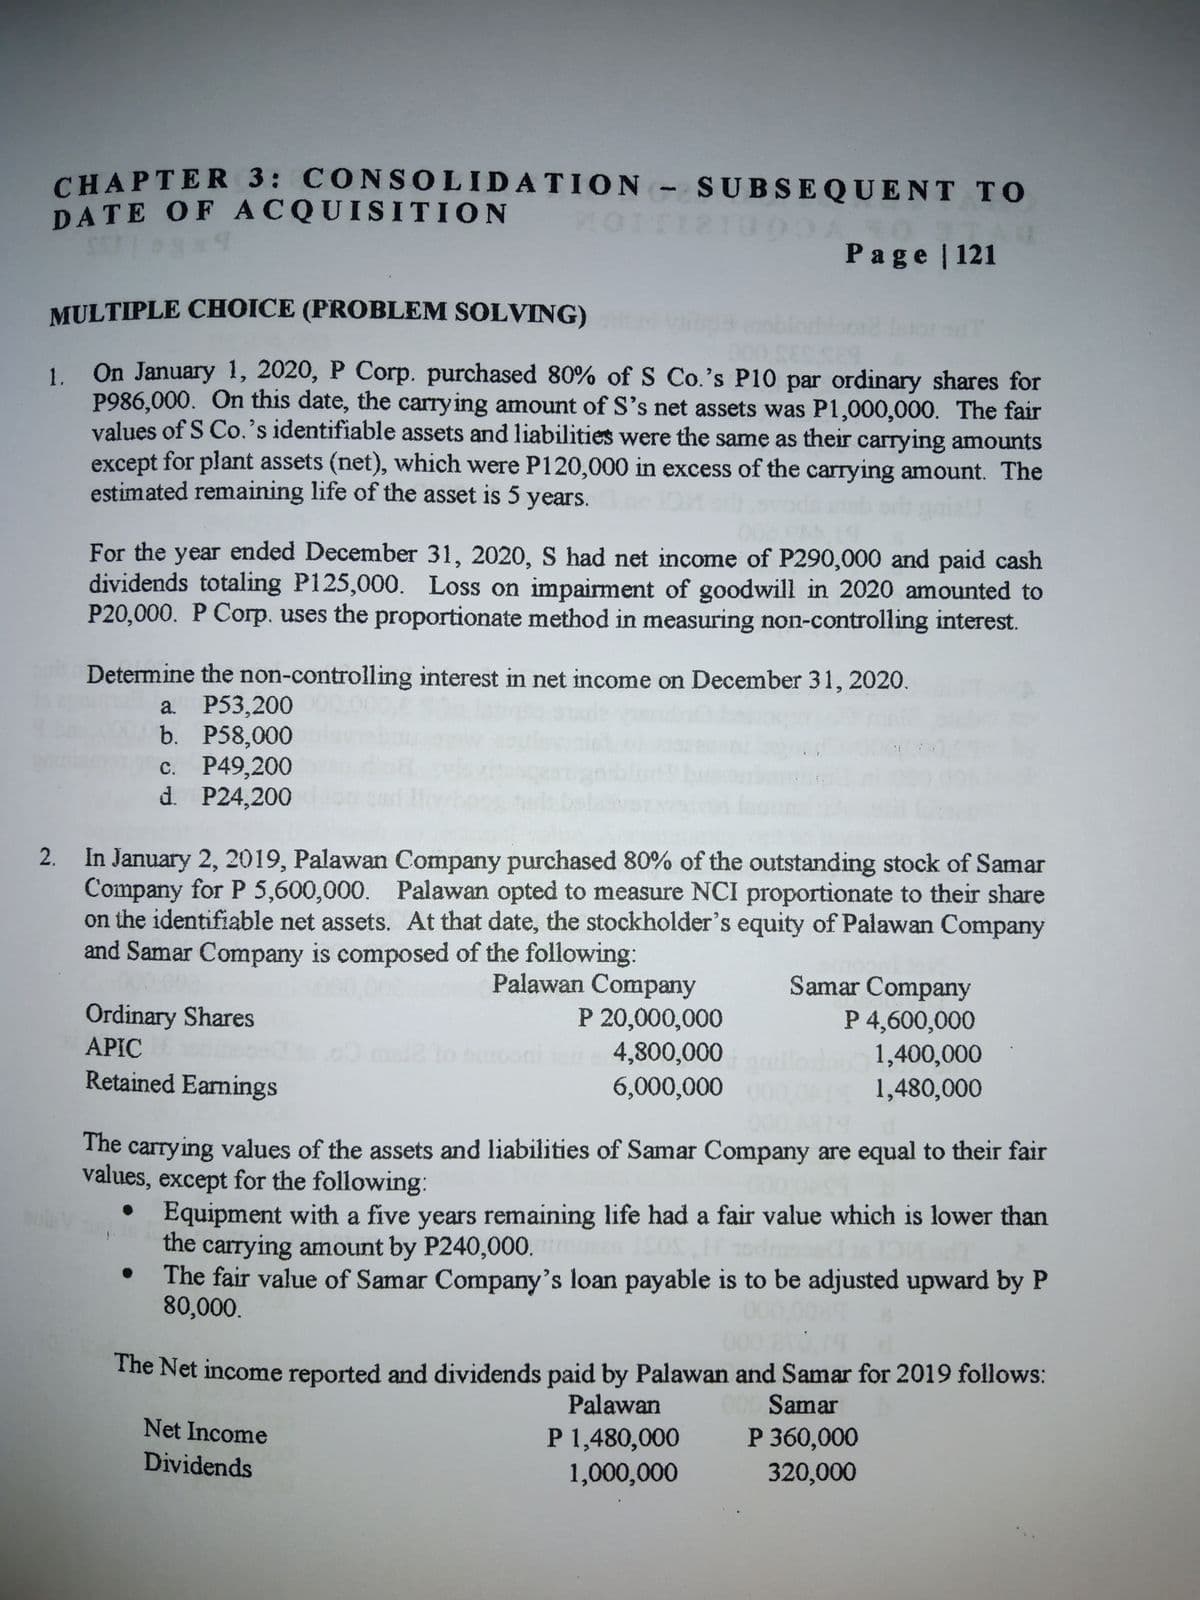 CHAPTER 3: CONSOLIDATION SUBSEQUENT TO
DATE OF ACQUISITION
Page | 121
MULTIPLE CHOICE (PROBLEM SOLVING)
1.
On January 1, 2020, P Corp. purchased 80% of S Co.'s P10 par ordinary shares for
P986,000. On this date, the carry ing amount of S's net assets was P1,000,000. The fair
values of S Co.'s identifiable assets and liabilities were the same as their carrying amounts
except for plant assets (net), which were P120,000 in excess of the carrying amount. The
estimated remaining life of the asset is 5 years.
For the year ended December 31, 2020, S had net income of P290,000 and paid cash
dividends totaling P125,000. Loss on impairment of goodwill in 2020 amounted to
P20,000. P Corp. uses the proportionate method in measuring non-controlling interest.
Determine the non-controlling interest in net income on December 31, 2020.
a. P53,200
b. P58,000
c. P49,200
d. P24,200
2. In January 2, 2019, Palawan Company purchased 80% of the outstanding stock of Samar
Company for P 5,600,000. Palawan opted to measure NCI proportionate to their share
on the identifiable net assets. At that date, the stockholder's equity of Palawan Company
and Samar Company is composed of the following:
Palawan Company
P 20,000,000
4,800,000
6,000,000
Samar Company
P 4,600,000
1,400,000
1,480,000
Ordinary Shares
APIC
Retained Earnings
The carry ing values of the assets and liabilities of Samar Company are equal to their fair
values, except for the following:
• Equipment with a five years remaining life had a fair value which is lower than
the carrying amount by P240,000.
The fair value of Samar Company's loan payable is to be adjusted upward by P
80,000.
The Net income reported and dividends paid by Palawan and Samar for 2019 follows:
Palawan
Samar
Net Income
P 360,000
P 1,480,000
1,000,000
Dividends
320,000
